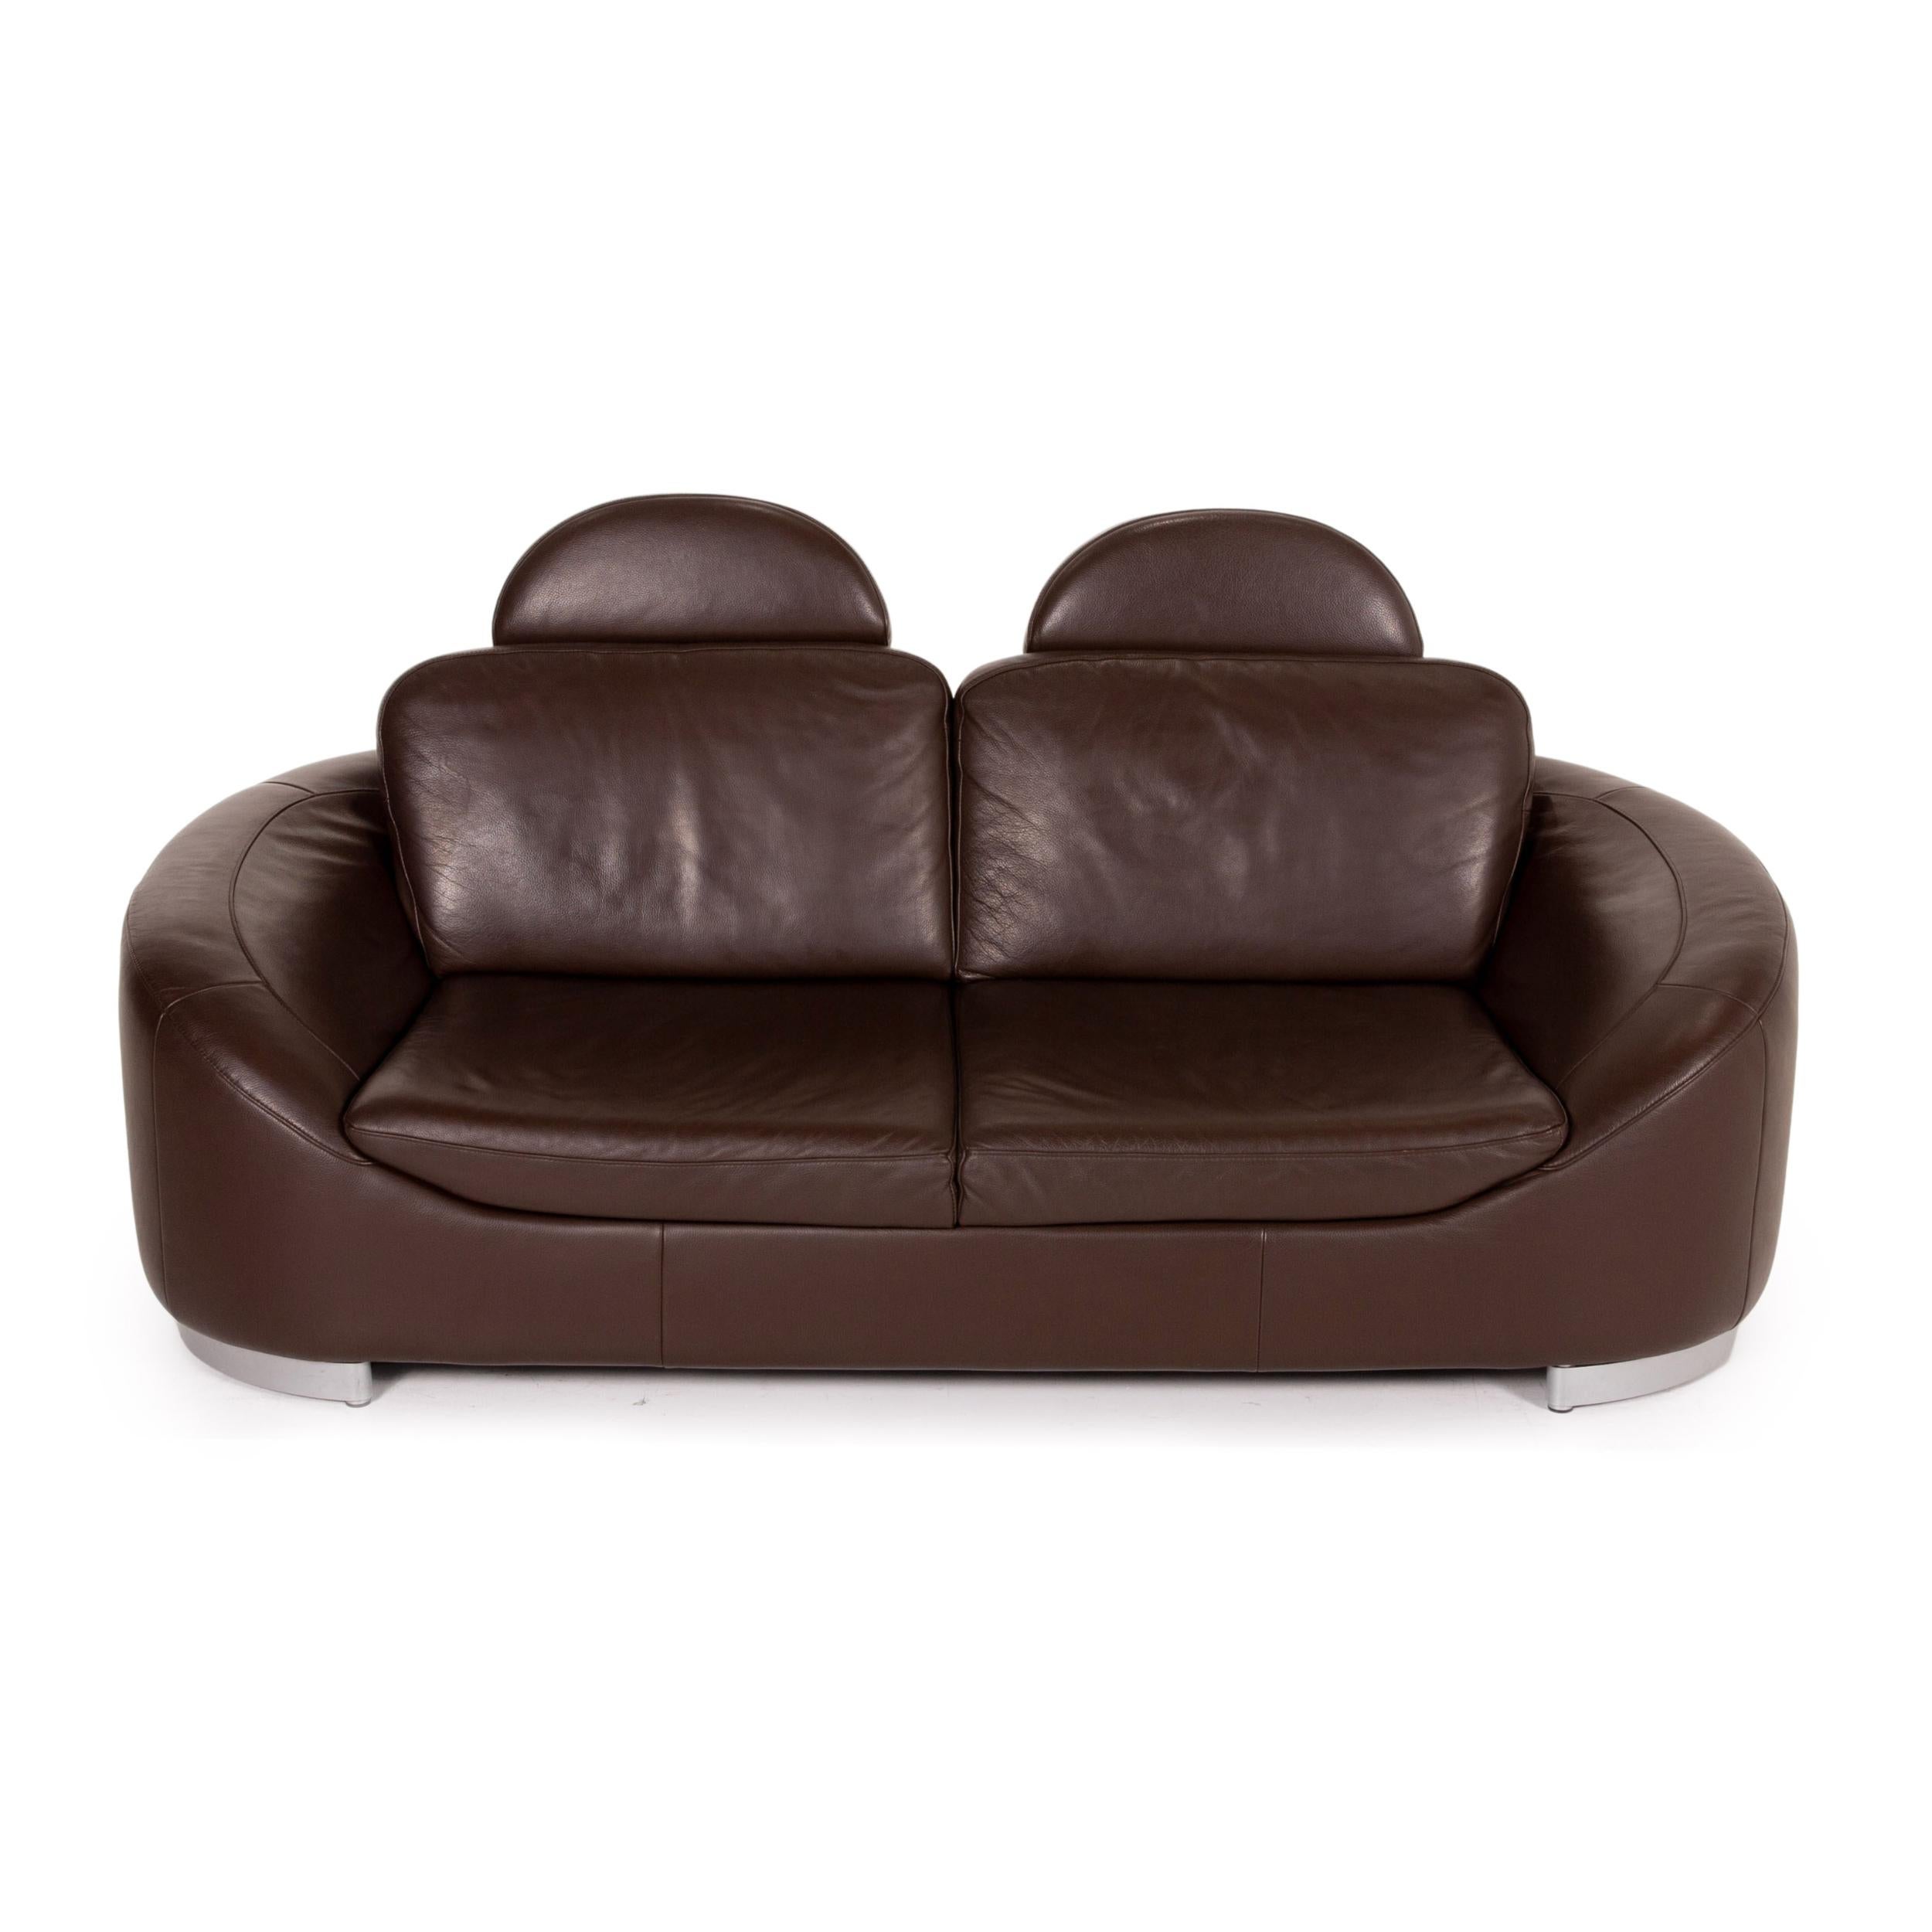 Ewald Schillig Leather Sofa Set Brown Dark Brown 2x Two-Seater For Sale 8